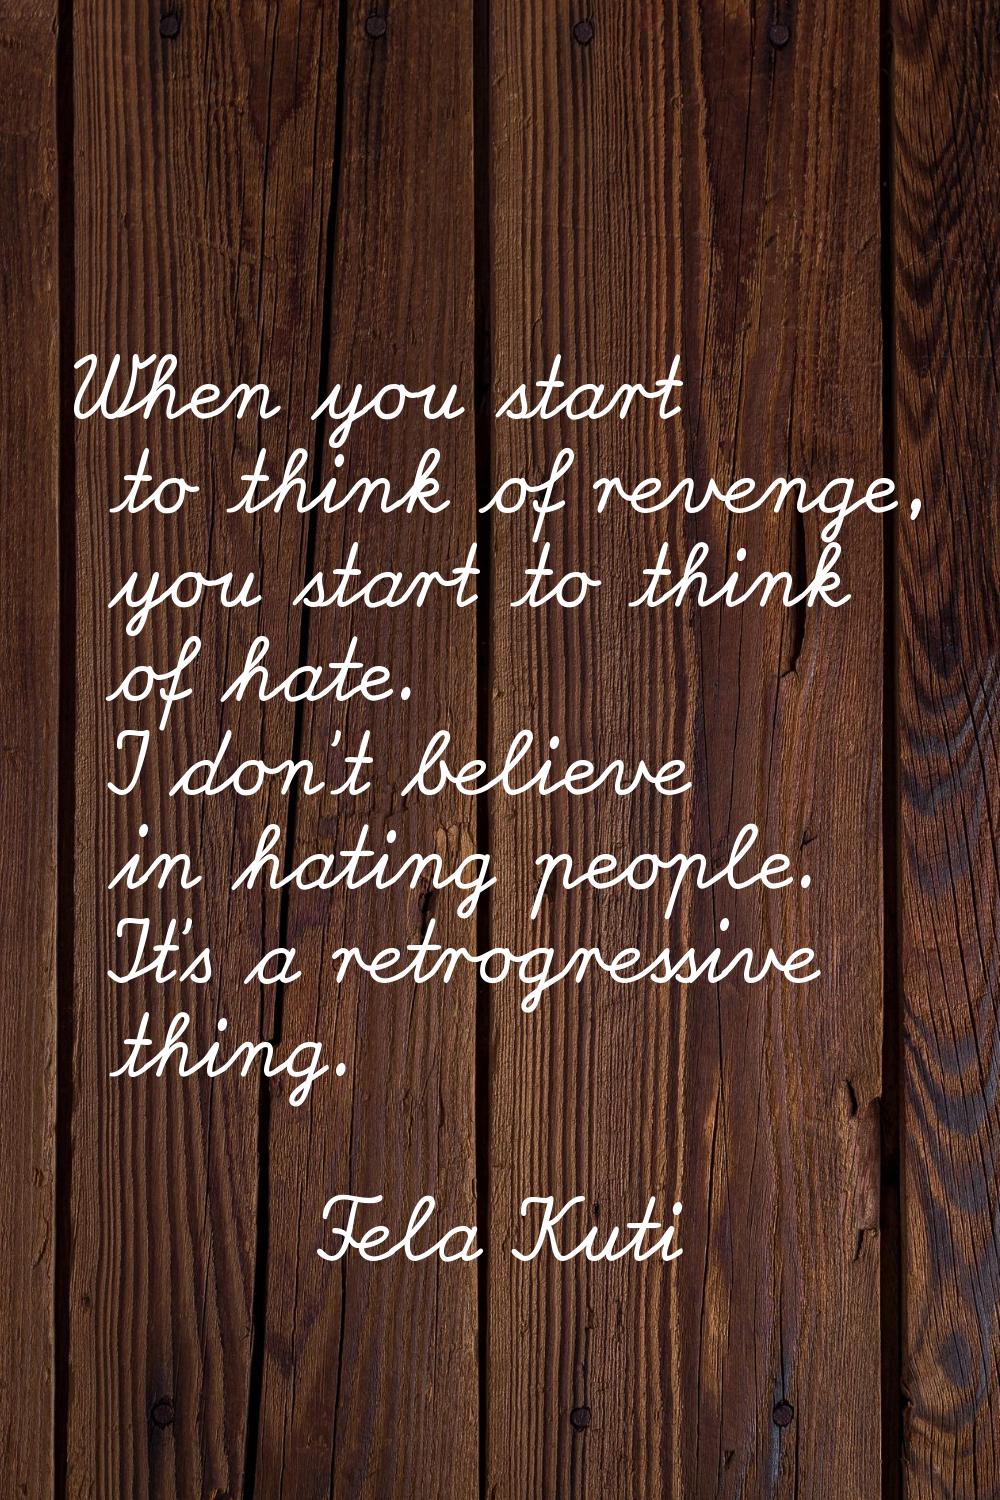 When you start to think of revenge, you start to think of hate. I don't believe in hating people. I